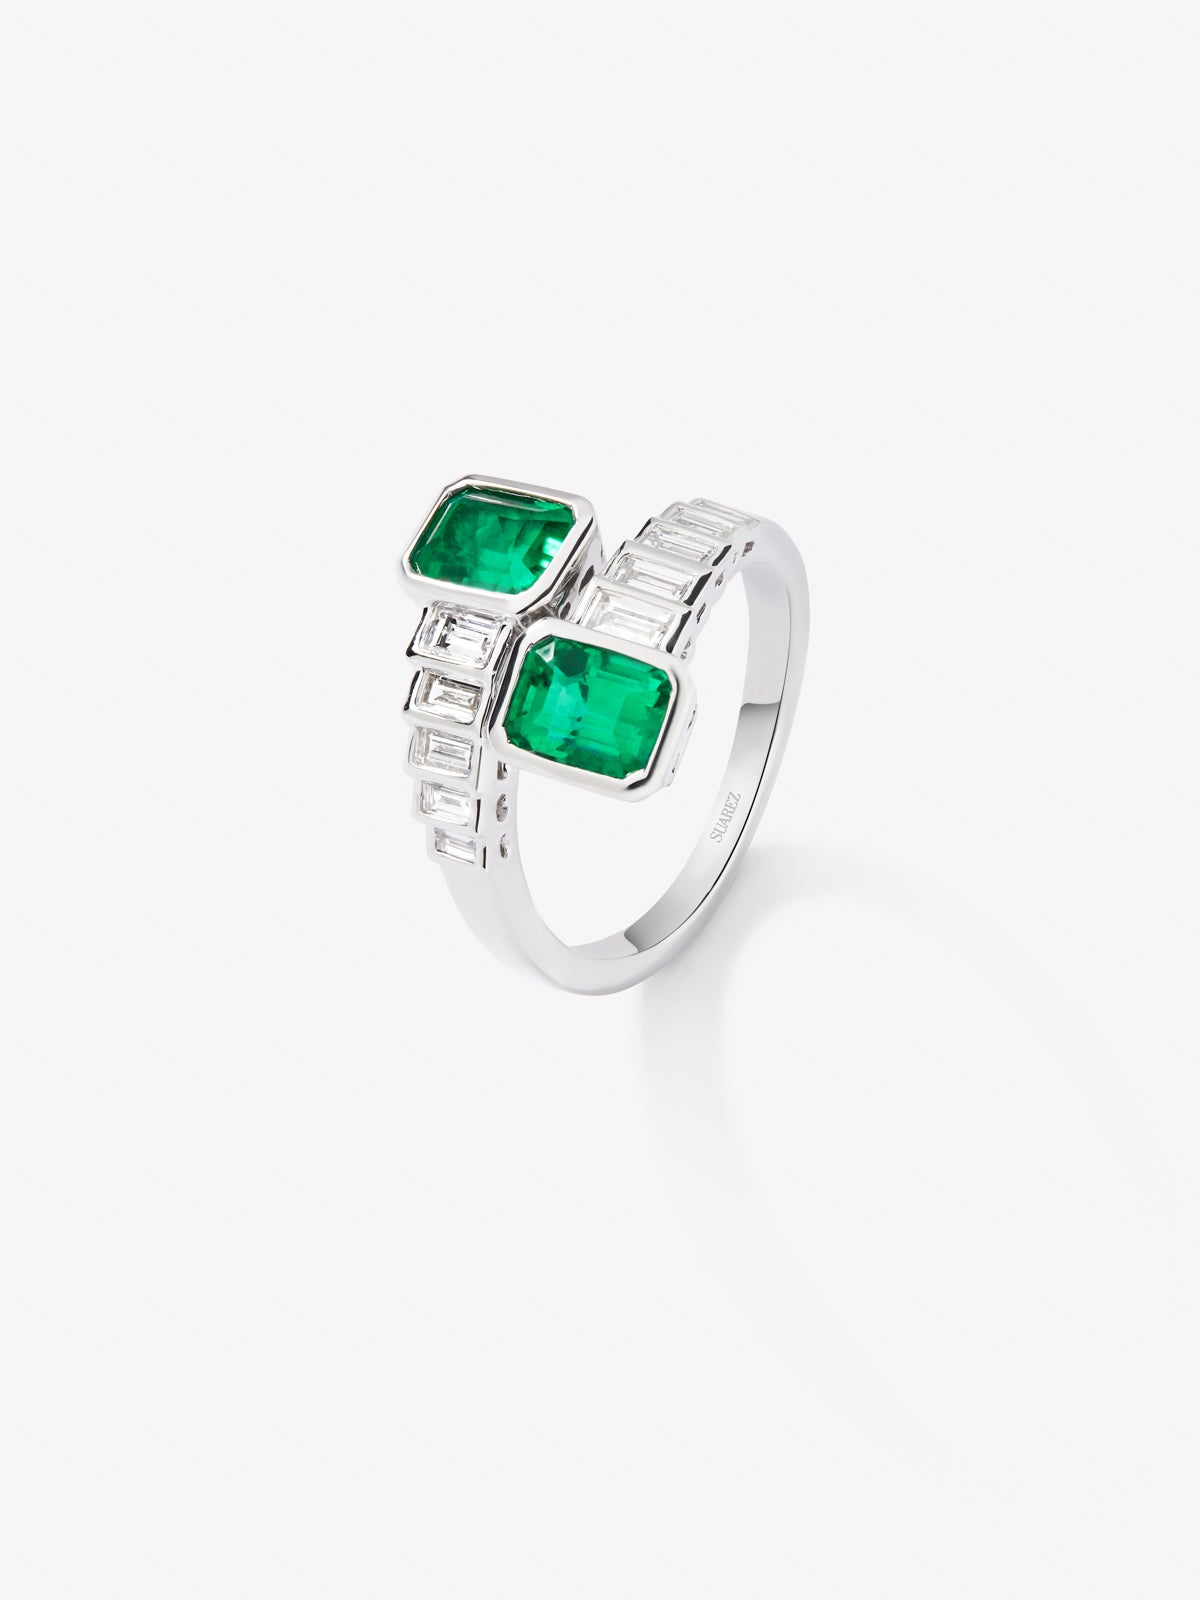 You and me ring in 18K white gold with 1.83 ct octagonal-cut green emeralds and 0.57 ct baguette-cut diamonds